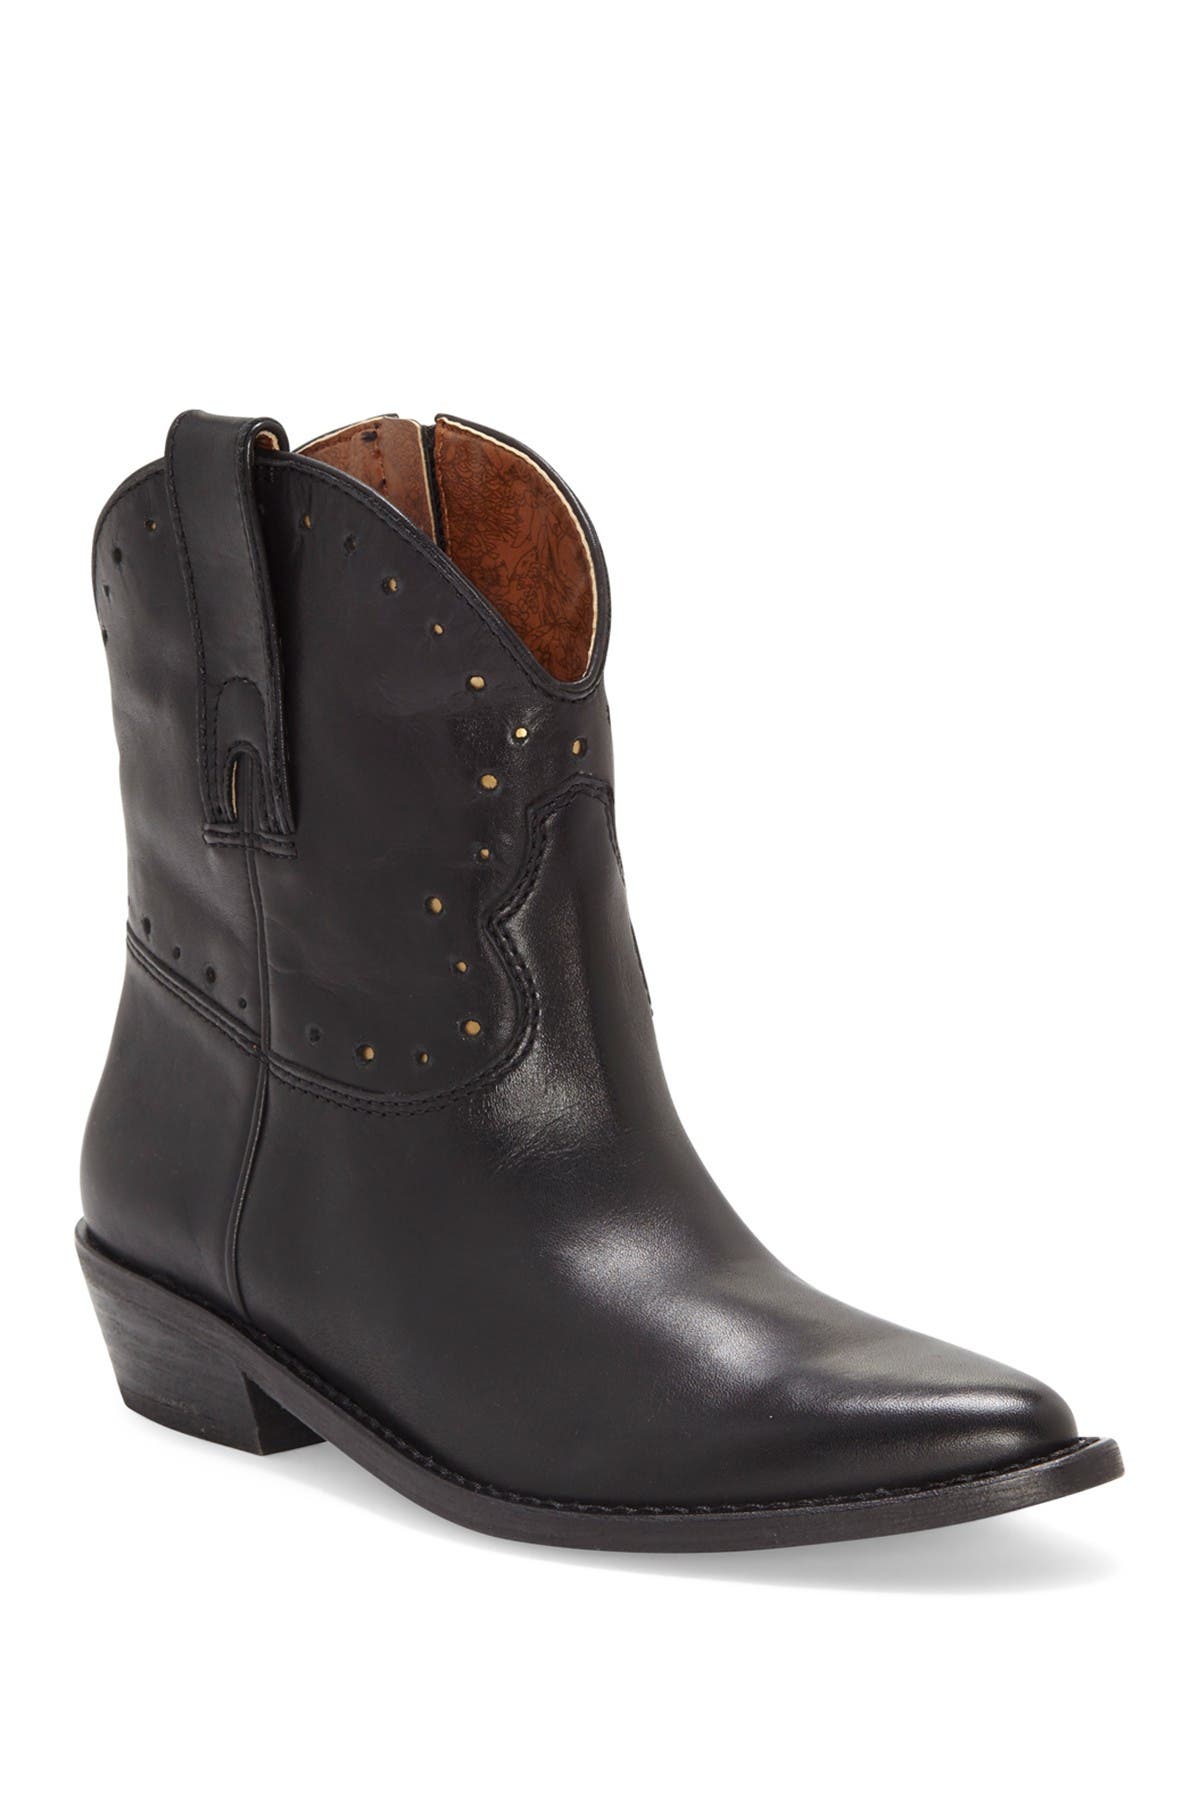 lucky brand pavel western bootie